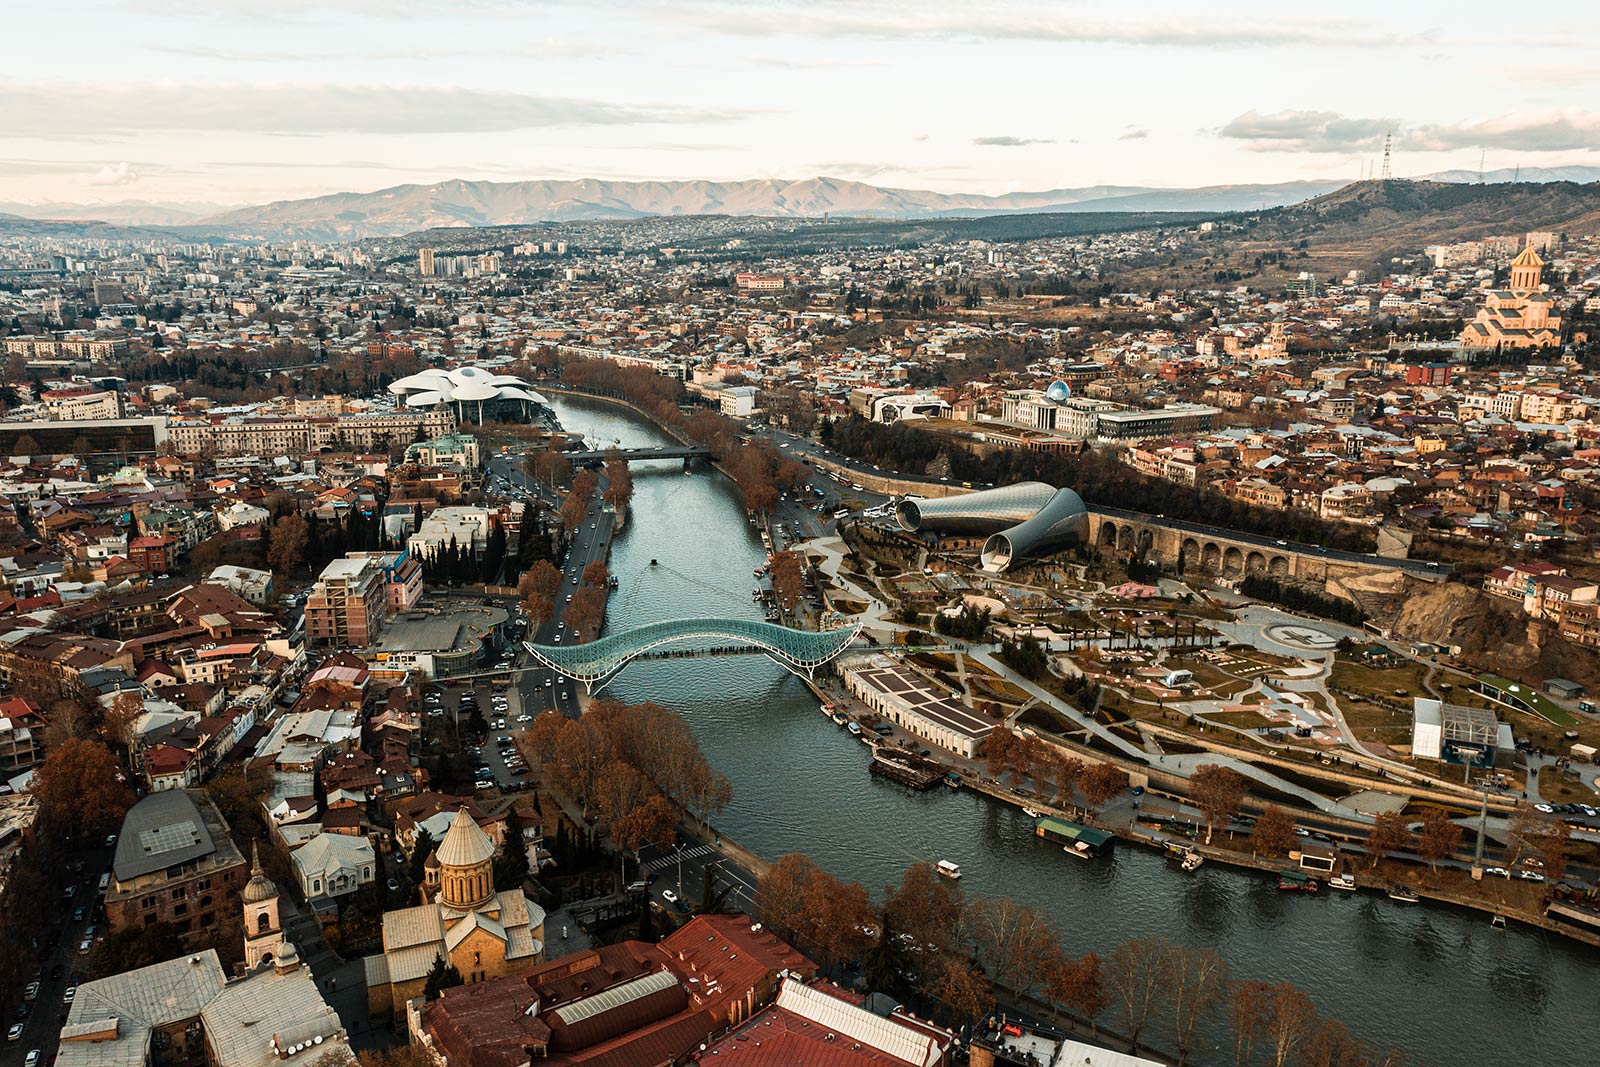 Birds eye view of the city of Tbilisi, Georgia. Wine at Georgian immigration